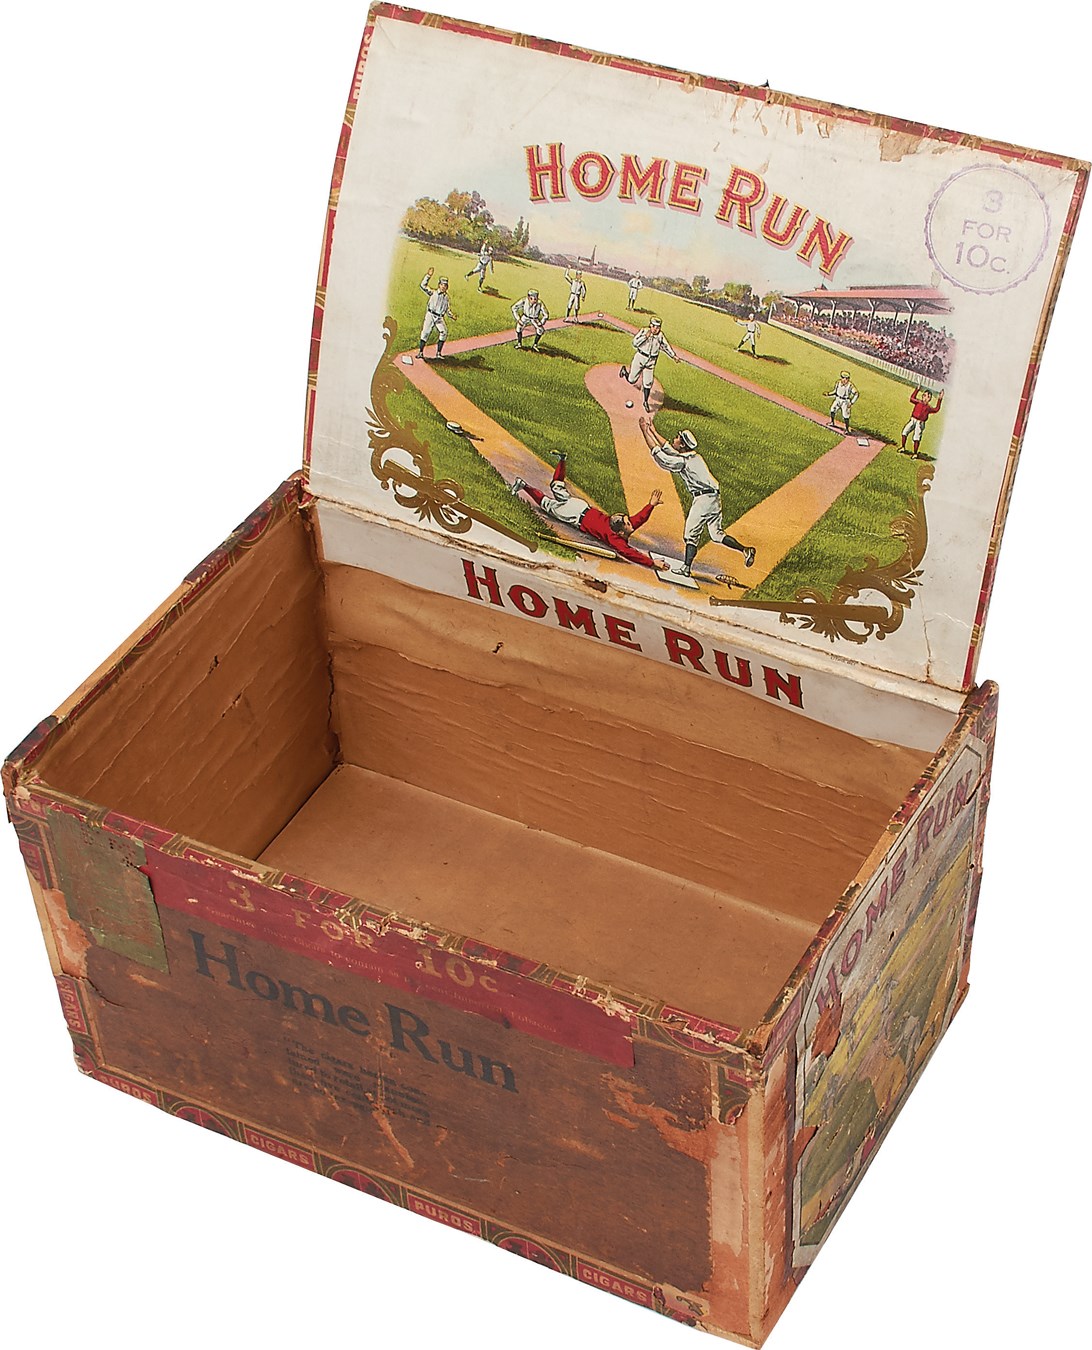 - Classic 1905 "Home Run" Baseball Cigar Box - Only One Known